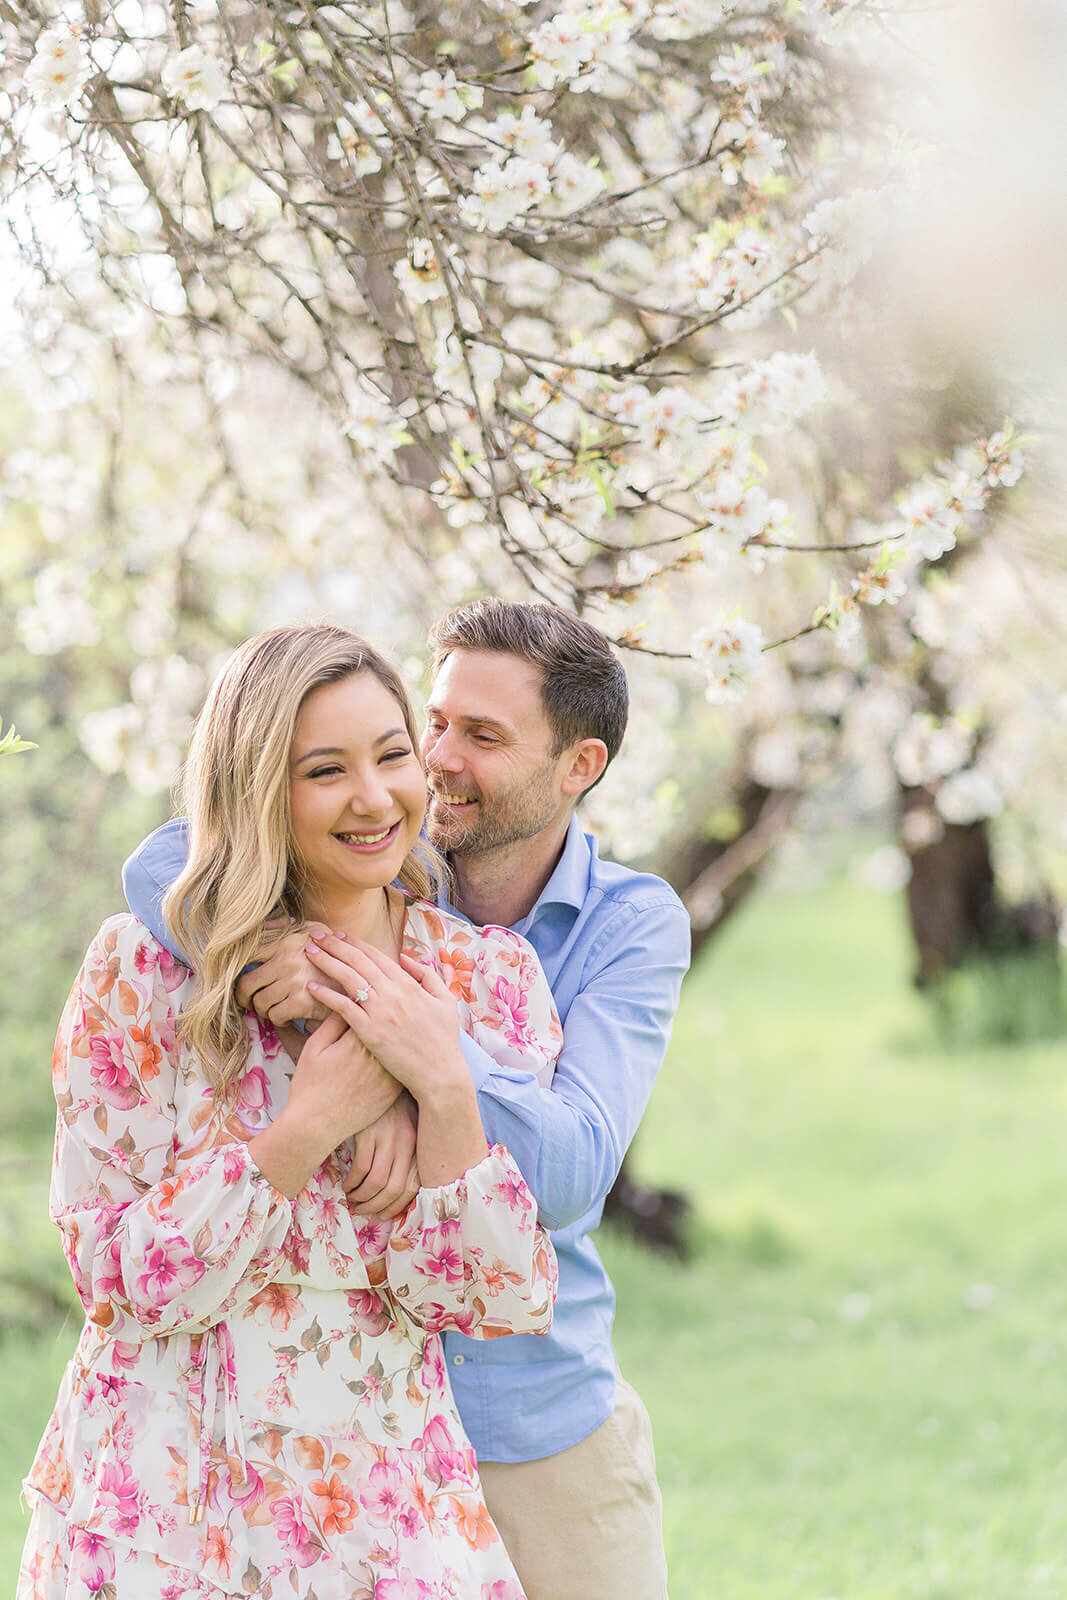 levate your love story with a mesmerizing almond blossom photoshoot in South Australia, taken by Brisbane destination photographer.